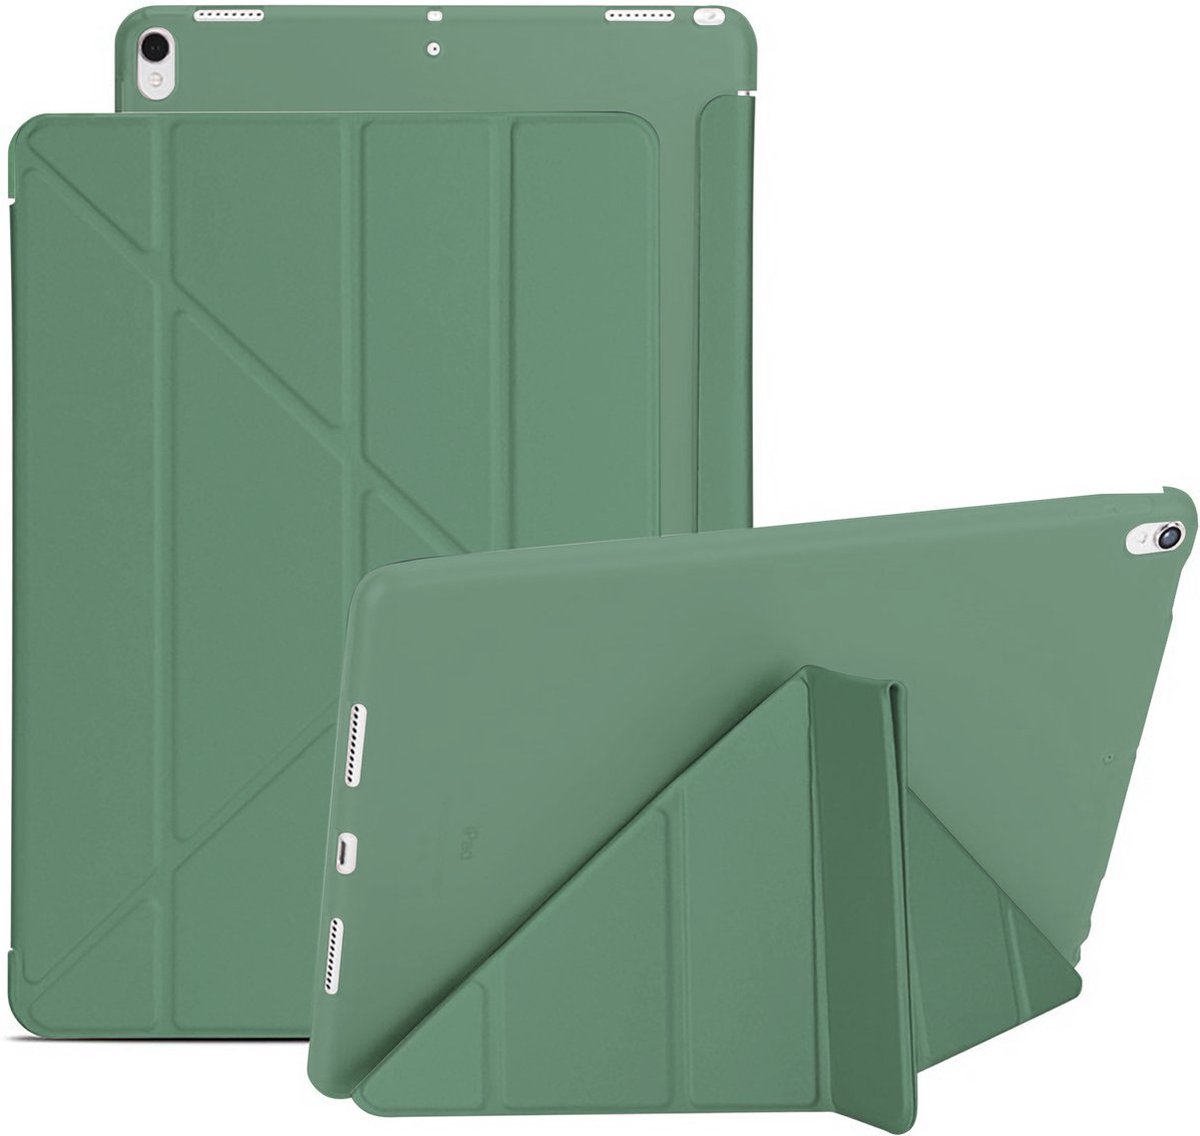 Tablet Hoes geschikt voor iPad Hoes 2016 - Pro - 9.7 inch - Smart Cover - A1673 - A1674 - A1675 - Donkergroen